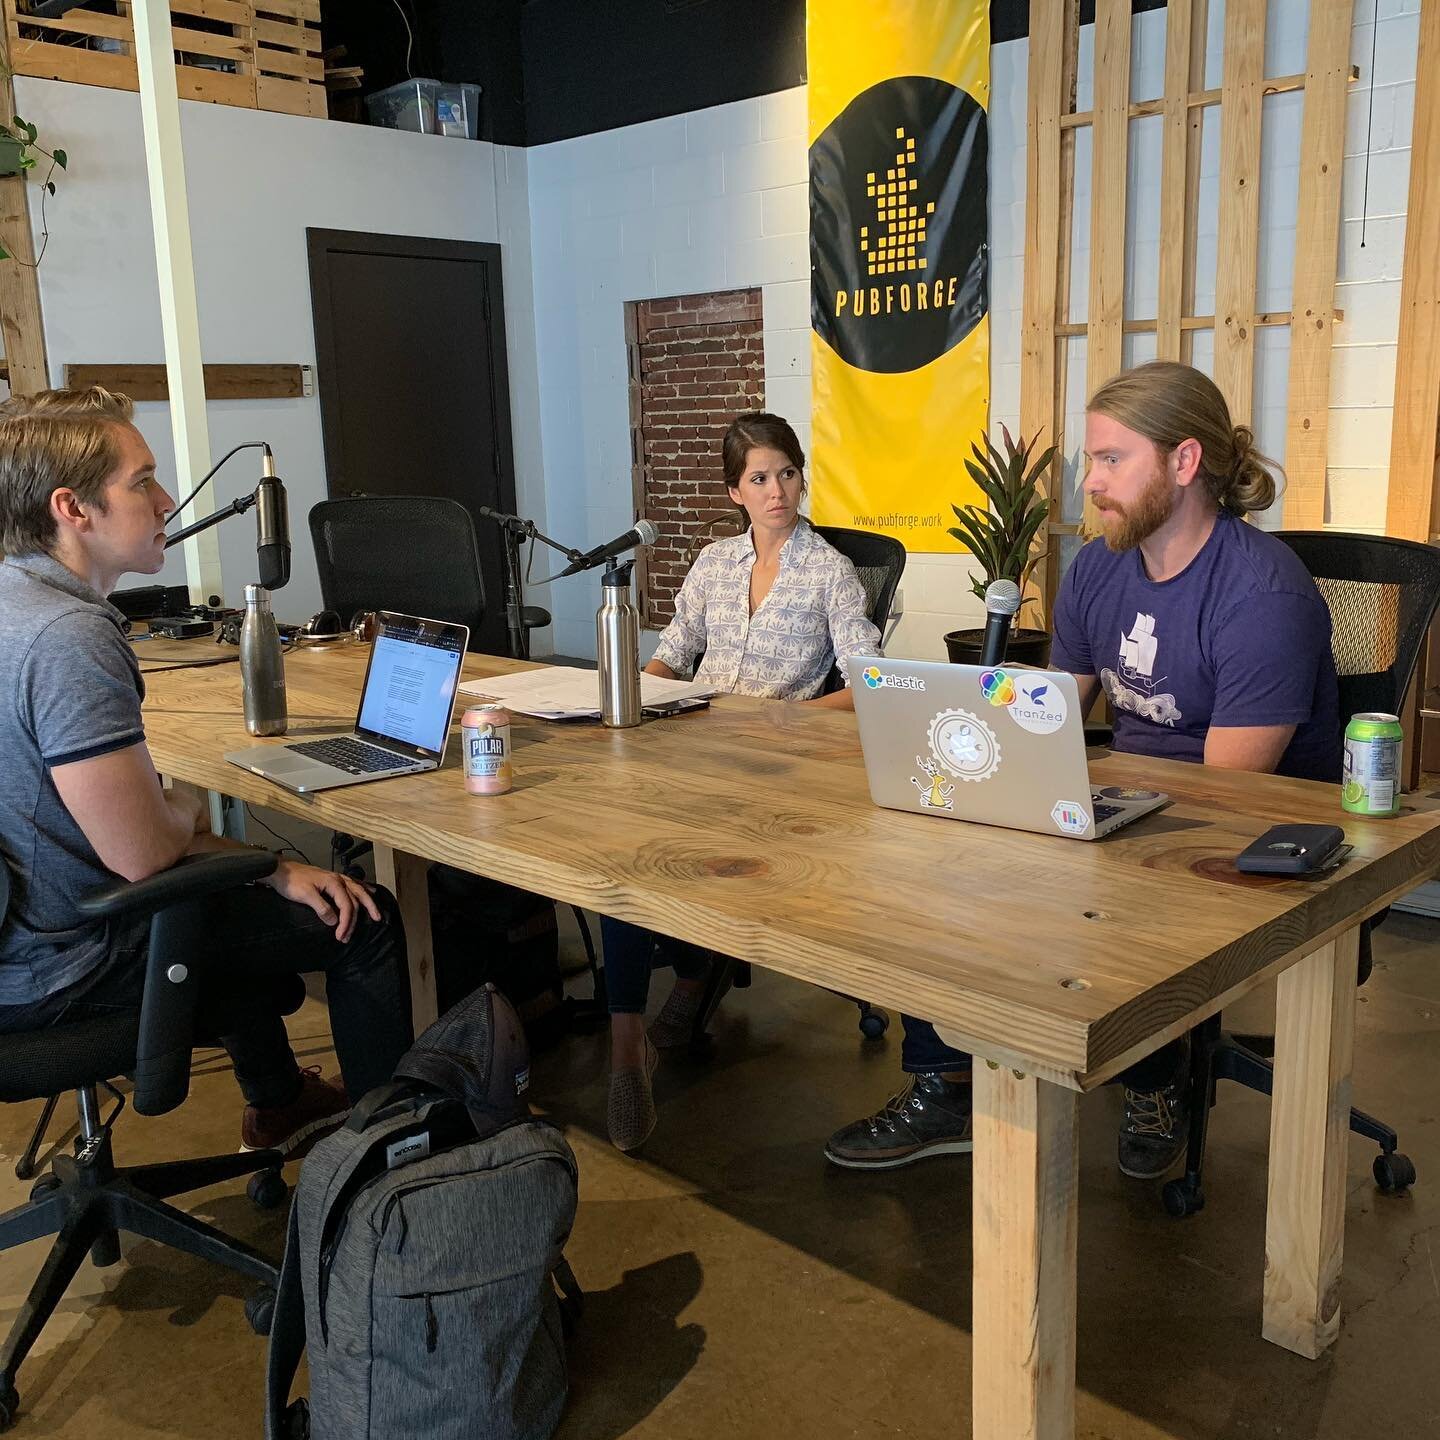 Having a great conversation about B Corps for our next episode of technical resolution with @indy_res_joel @randyb1724 and Sarah from @assets.pa.